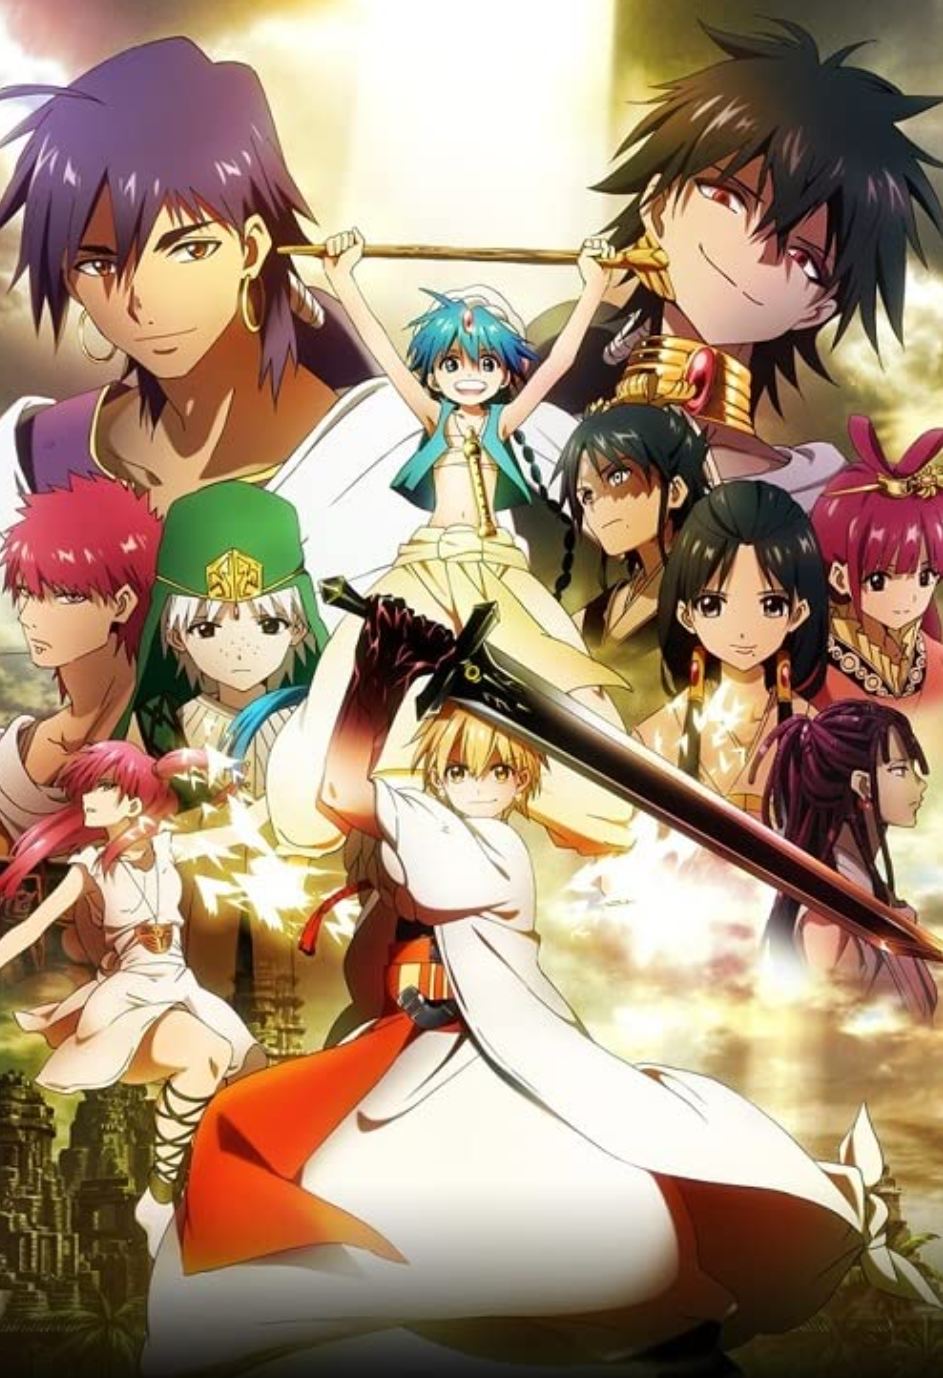 9 Fantasy Anime That Will Immerse You In A World Of Swords & Sorcery